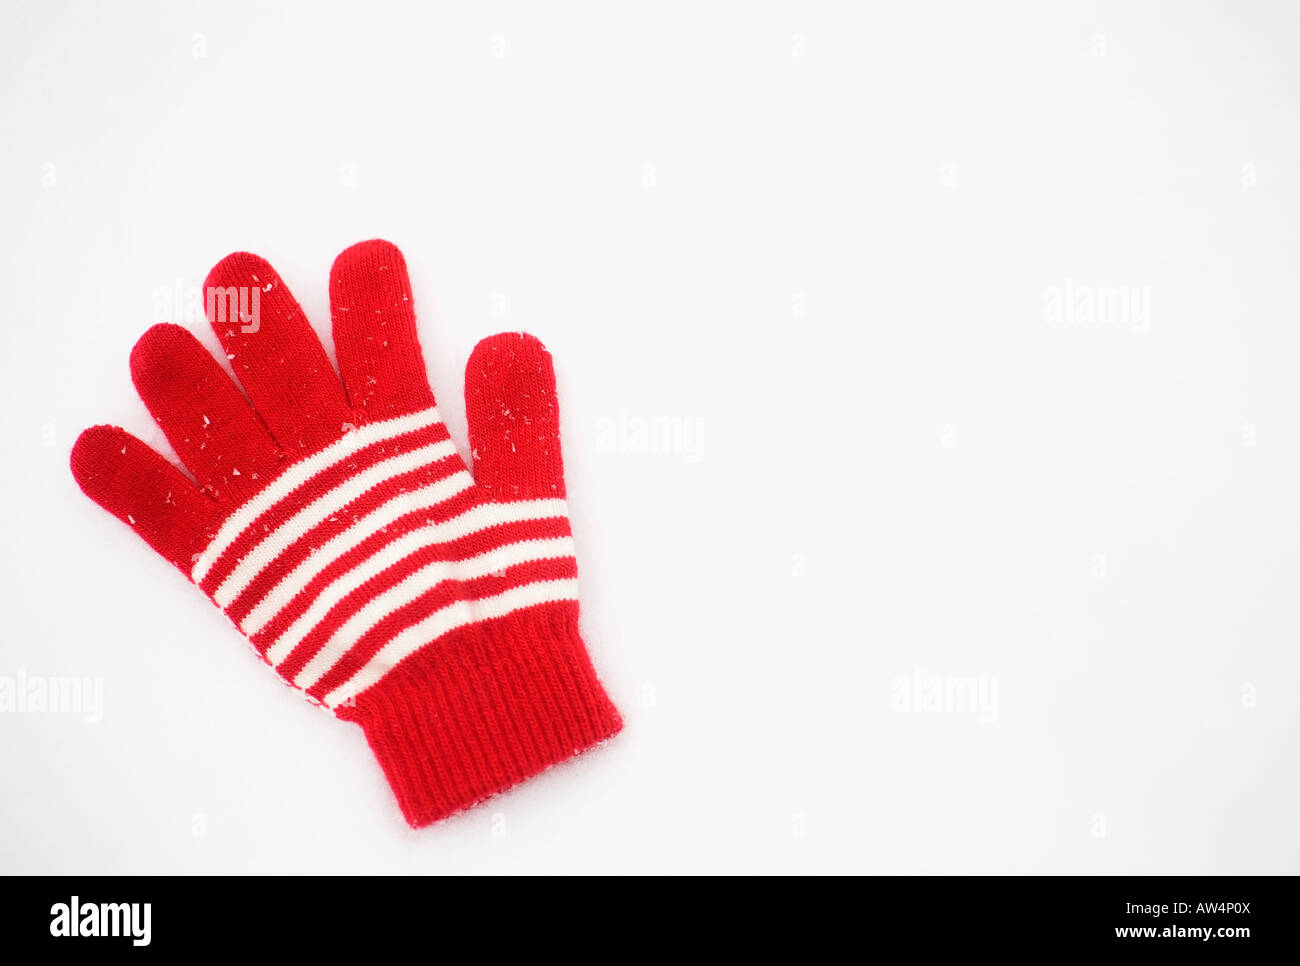 One red and white glove laying in the snow Stock Photo